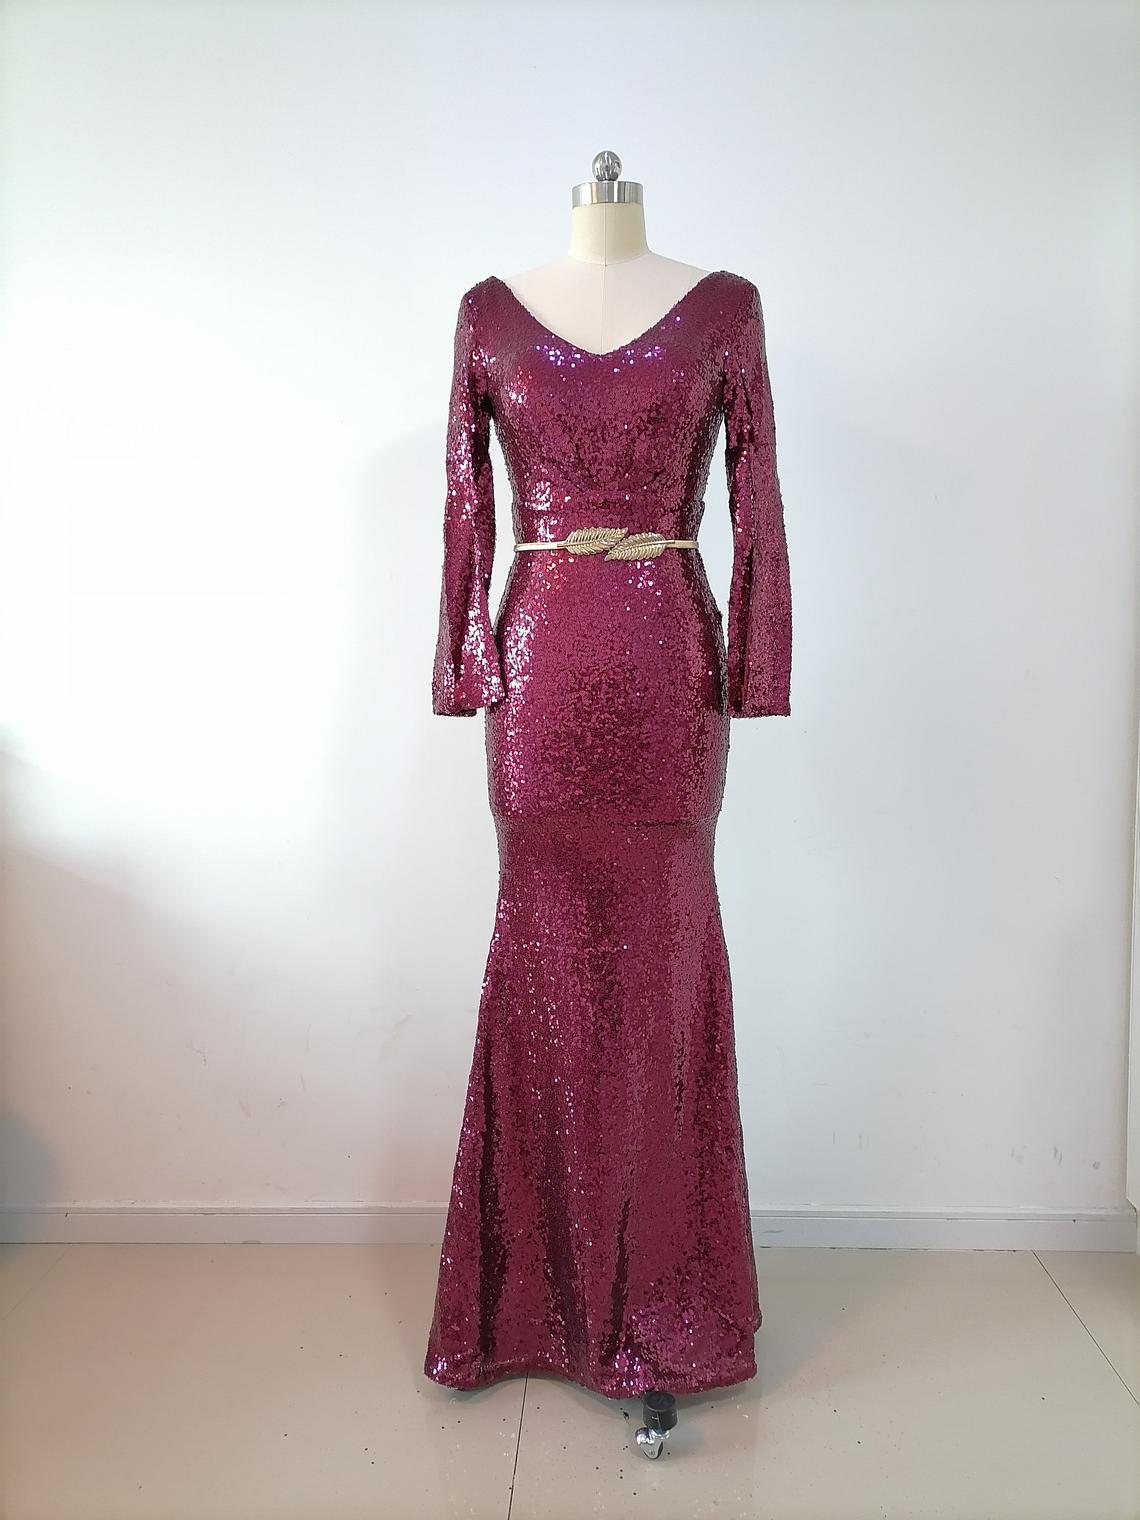 Evening Prom Gown Mermaid Dress Long V Neck Long Sleeves Sequins Women Formal Dress Homecoming Dresses Wedding Party Dress Bridal Gowns,pl2736